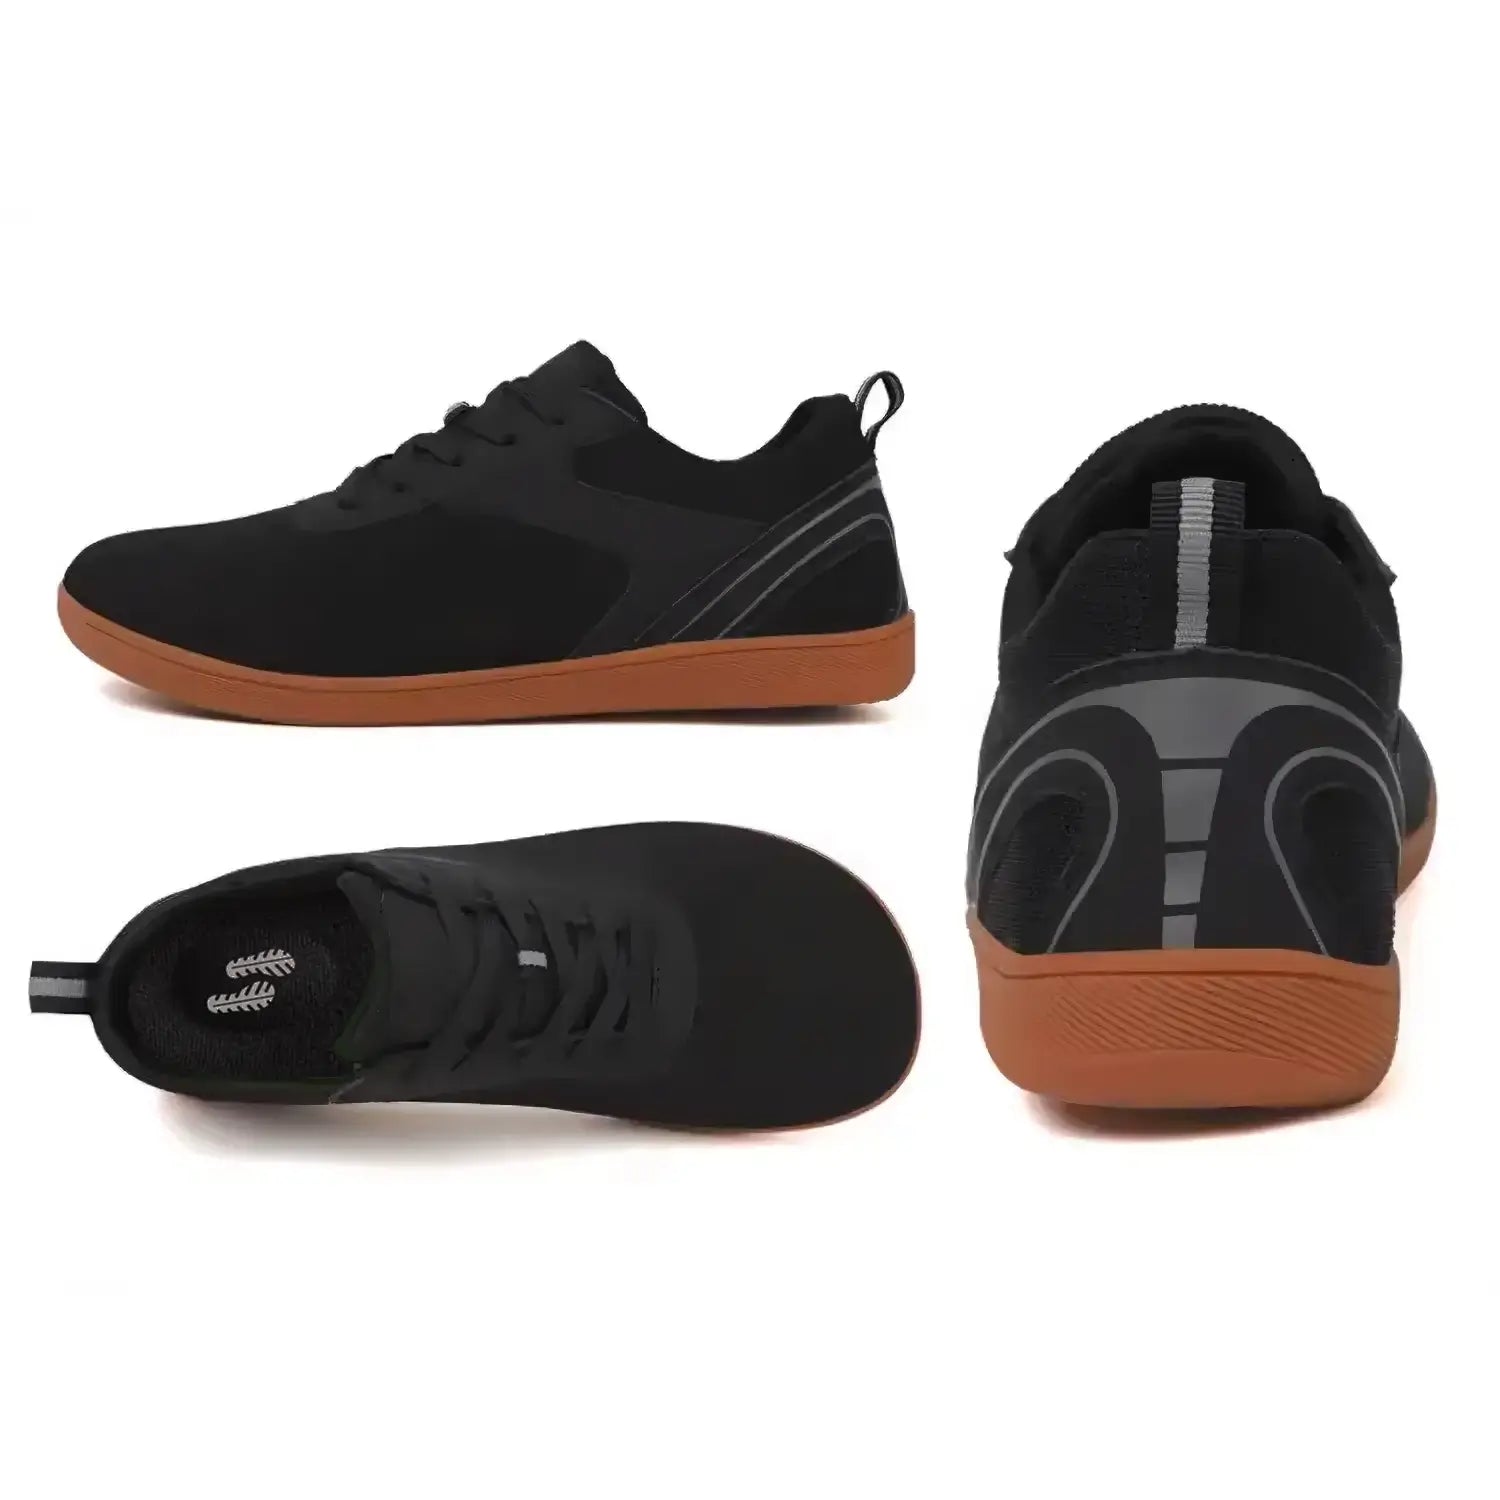 Native - Sneaker Barefoot Shoes (Unisex)